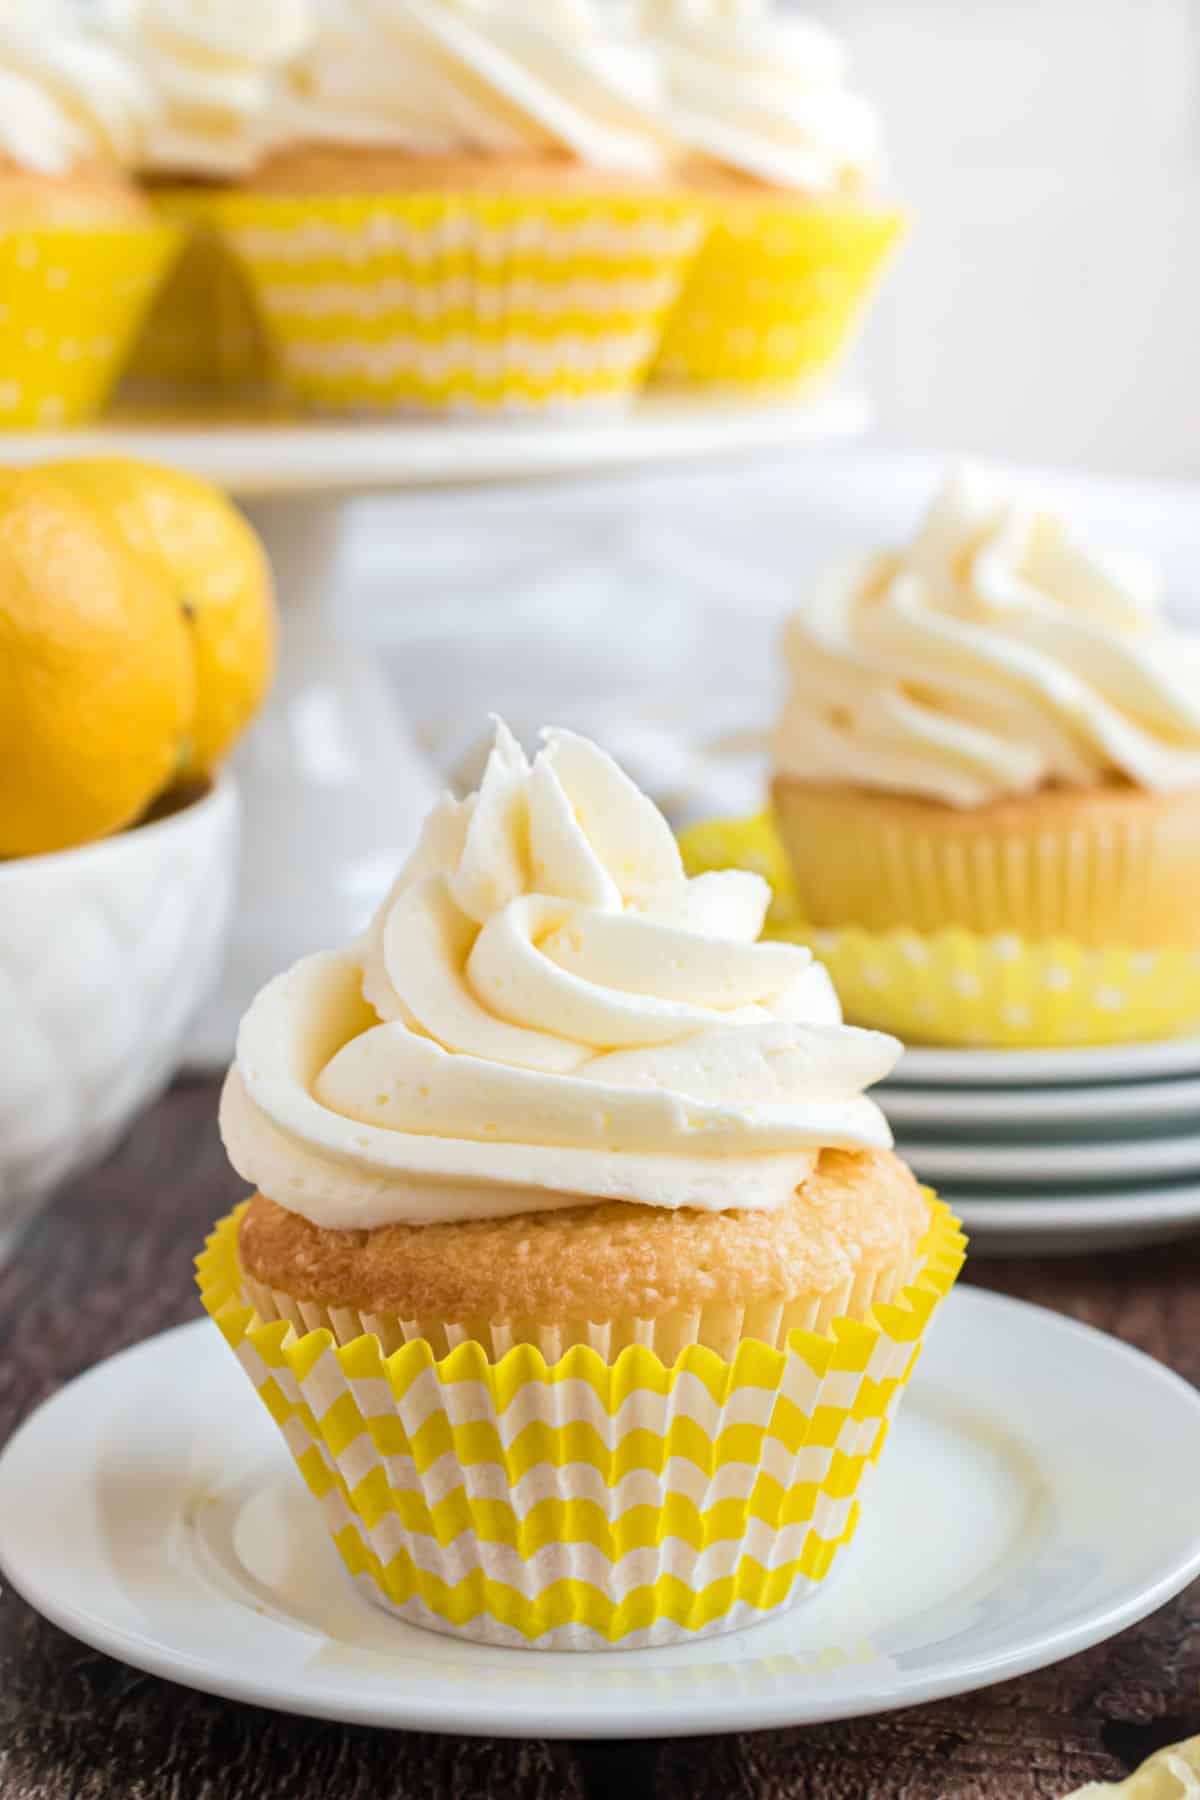 Lemon cupcake topped with lemon frosting on white plate.